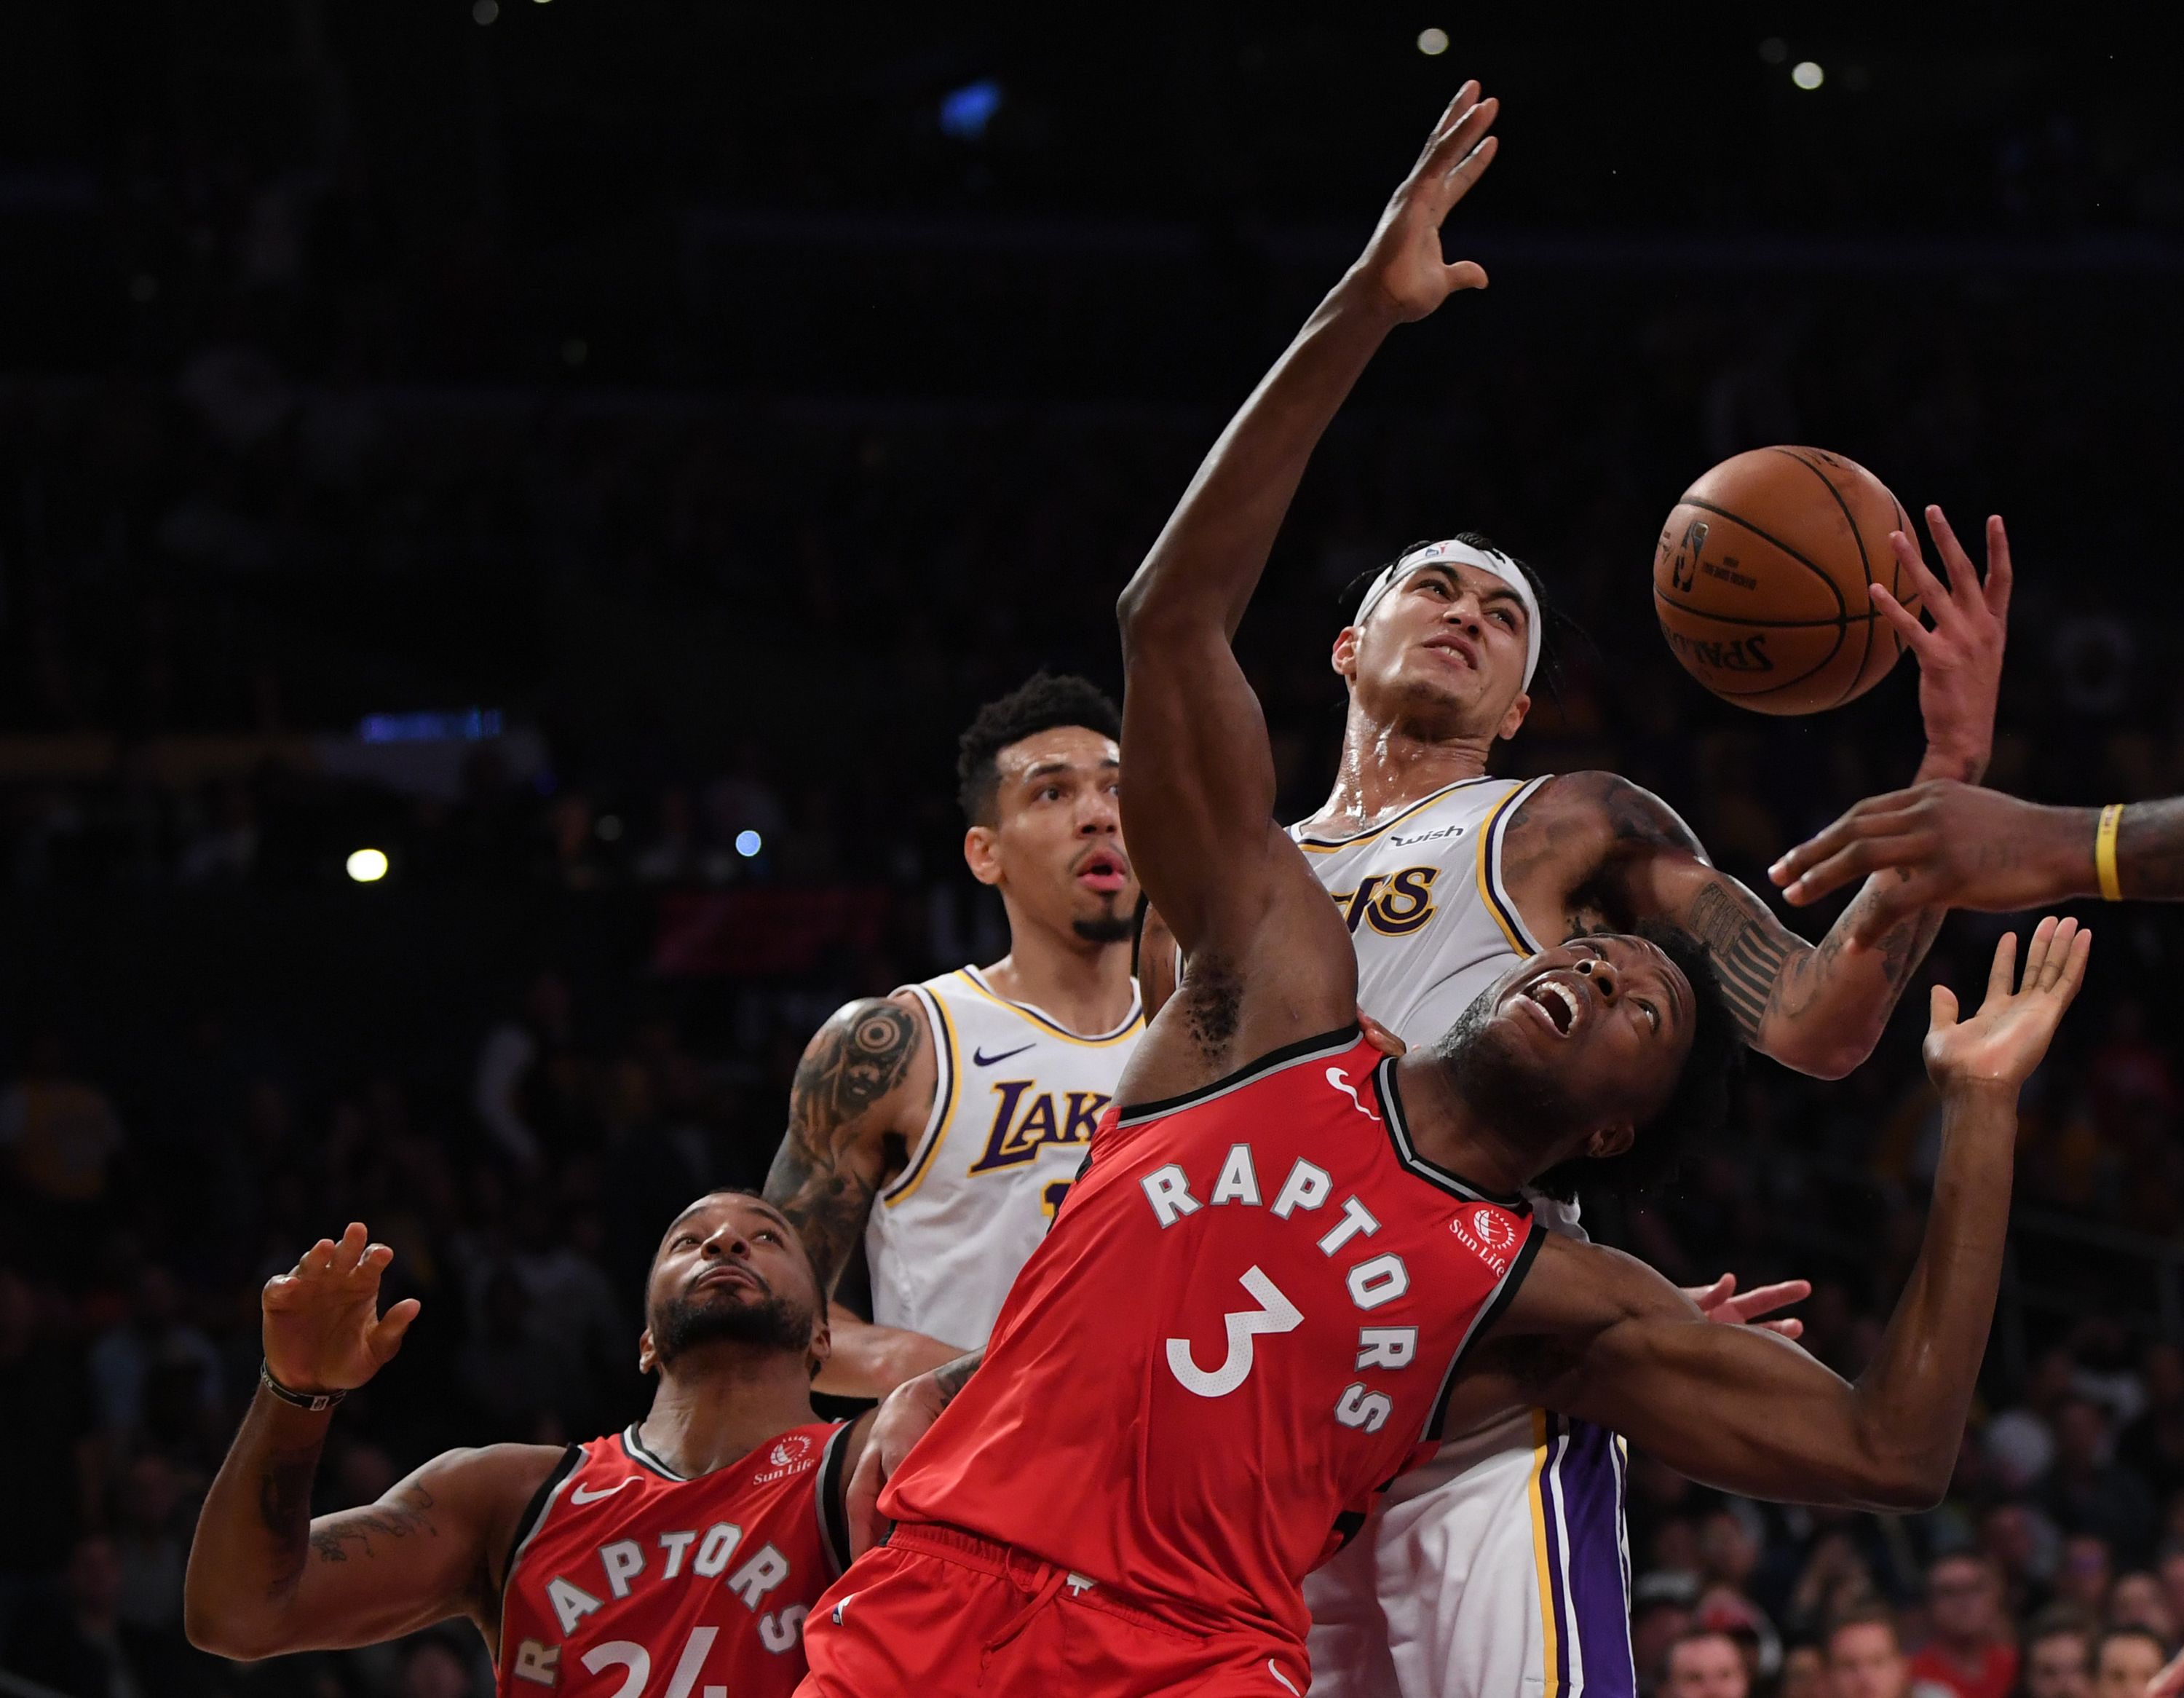 Losses and injuries are piling up for the Raptors. They could have